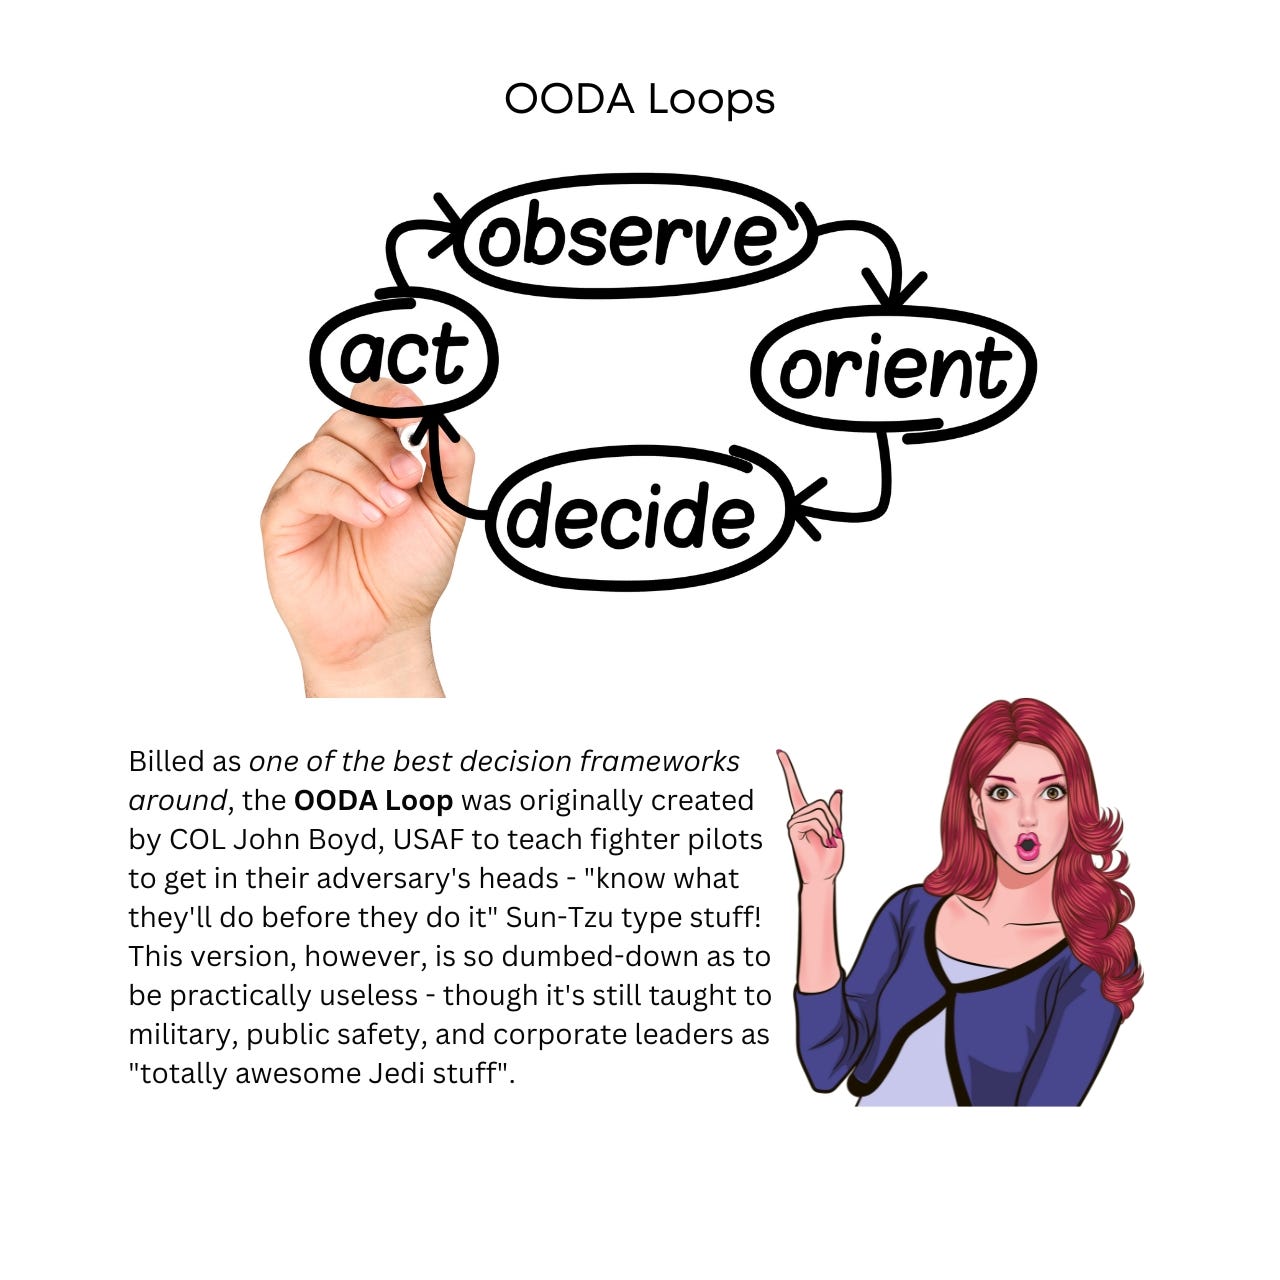 An OODA Loop - Observe, Orient, Decide, Act. Way oversimplified - it's like a wheel that's missing the lug nuts, to wit: useless.